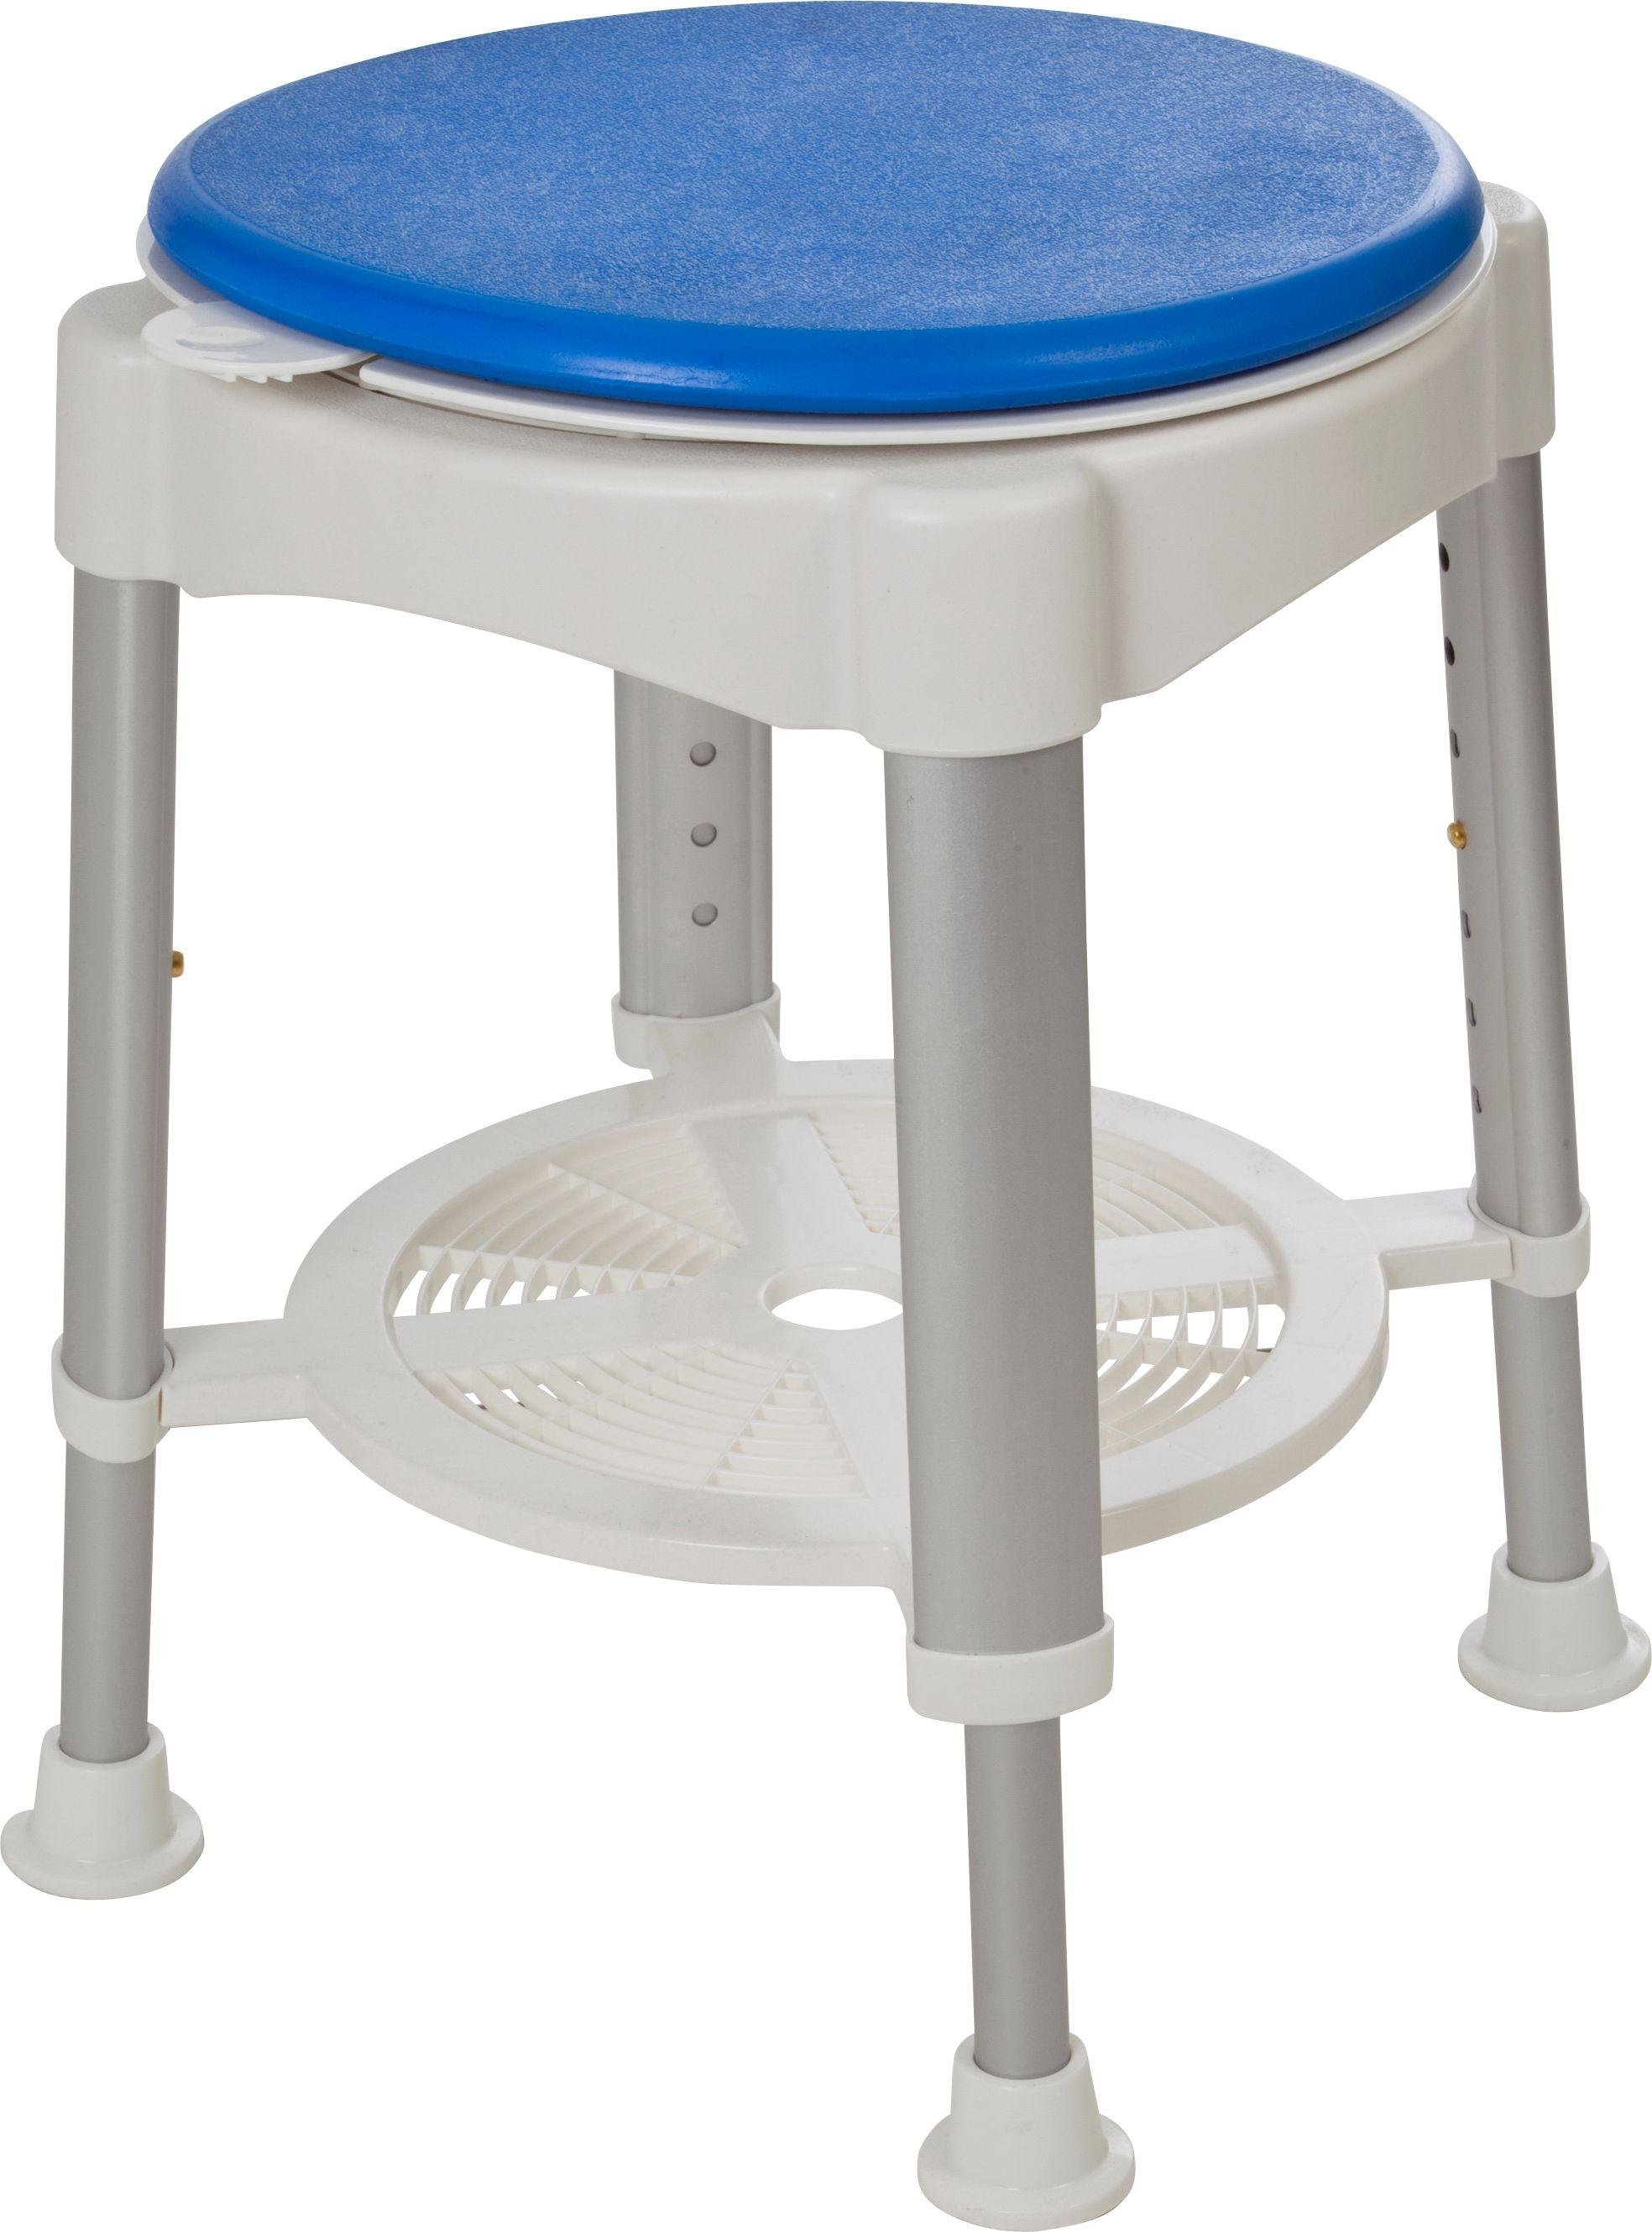 Round Shower Stool Review